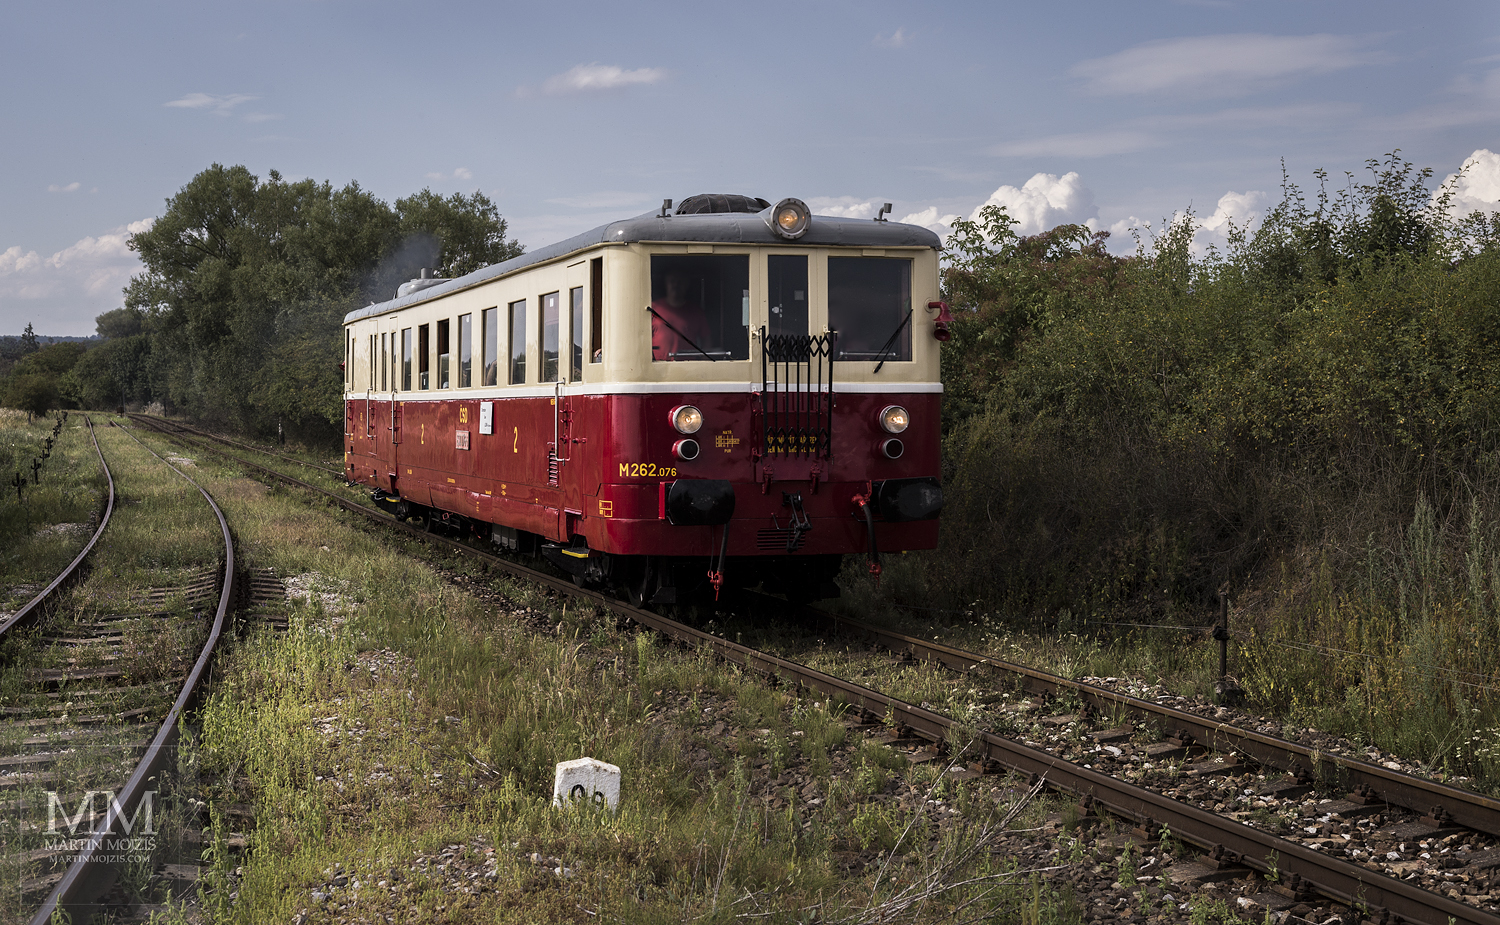 Large format, fine art photograph of small yellow and red train. Martin Mojzis.